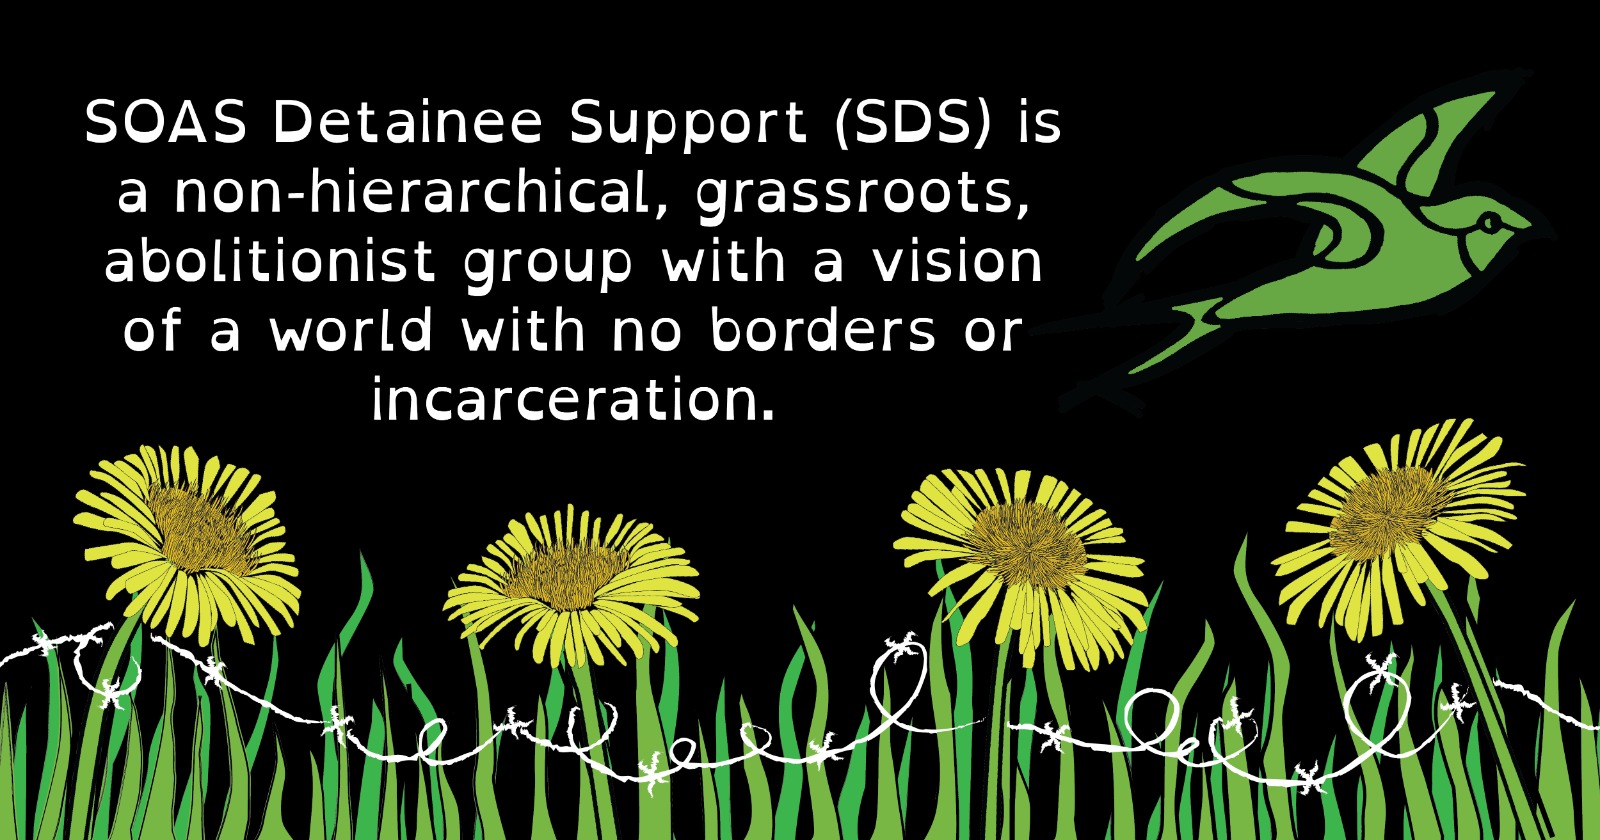 SOAS Detainee Support is a non-hierarchial, grassroots, abolitionist group with a vision of a world with no borders or incarceration.